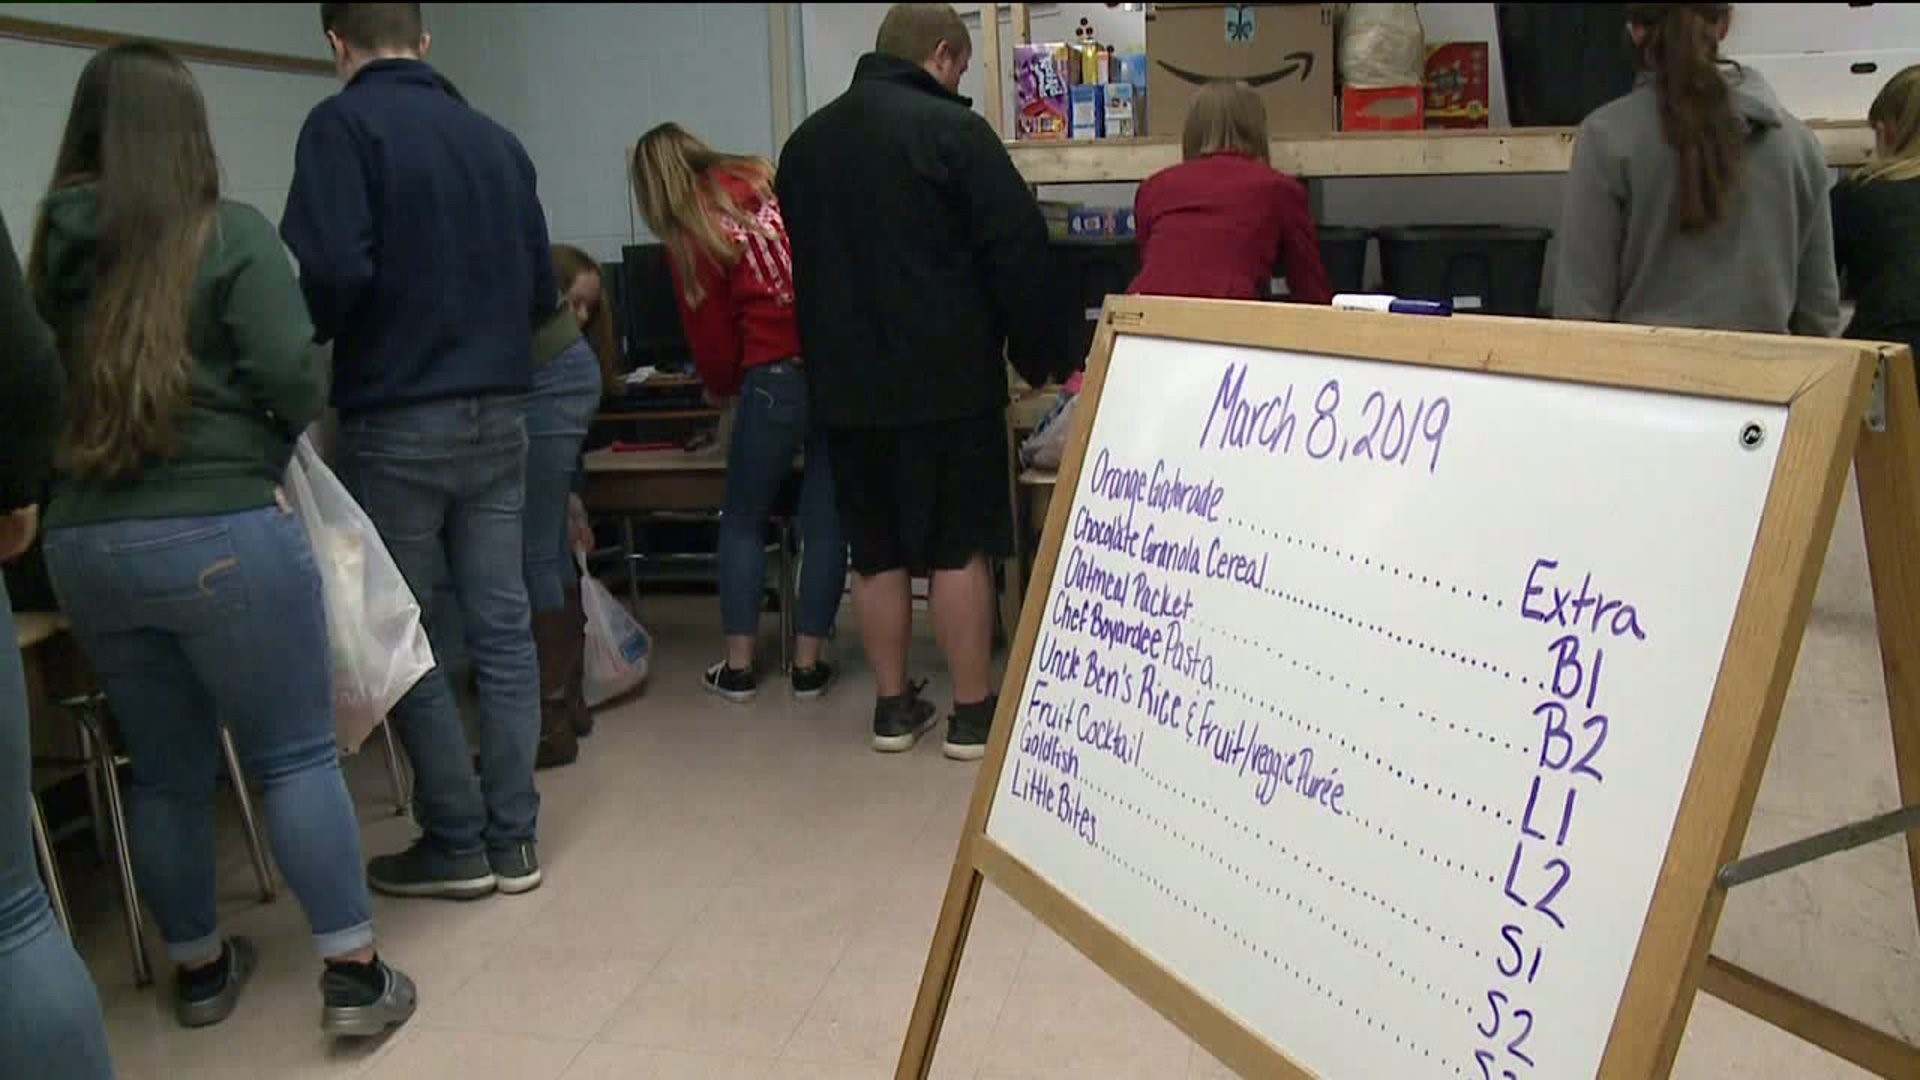 School Providing Food for Families in Need